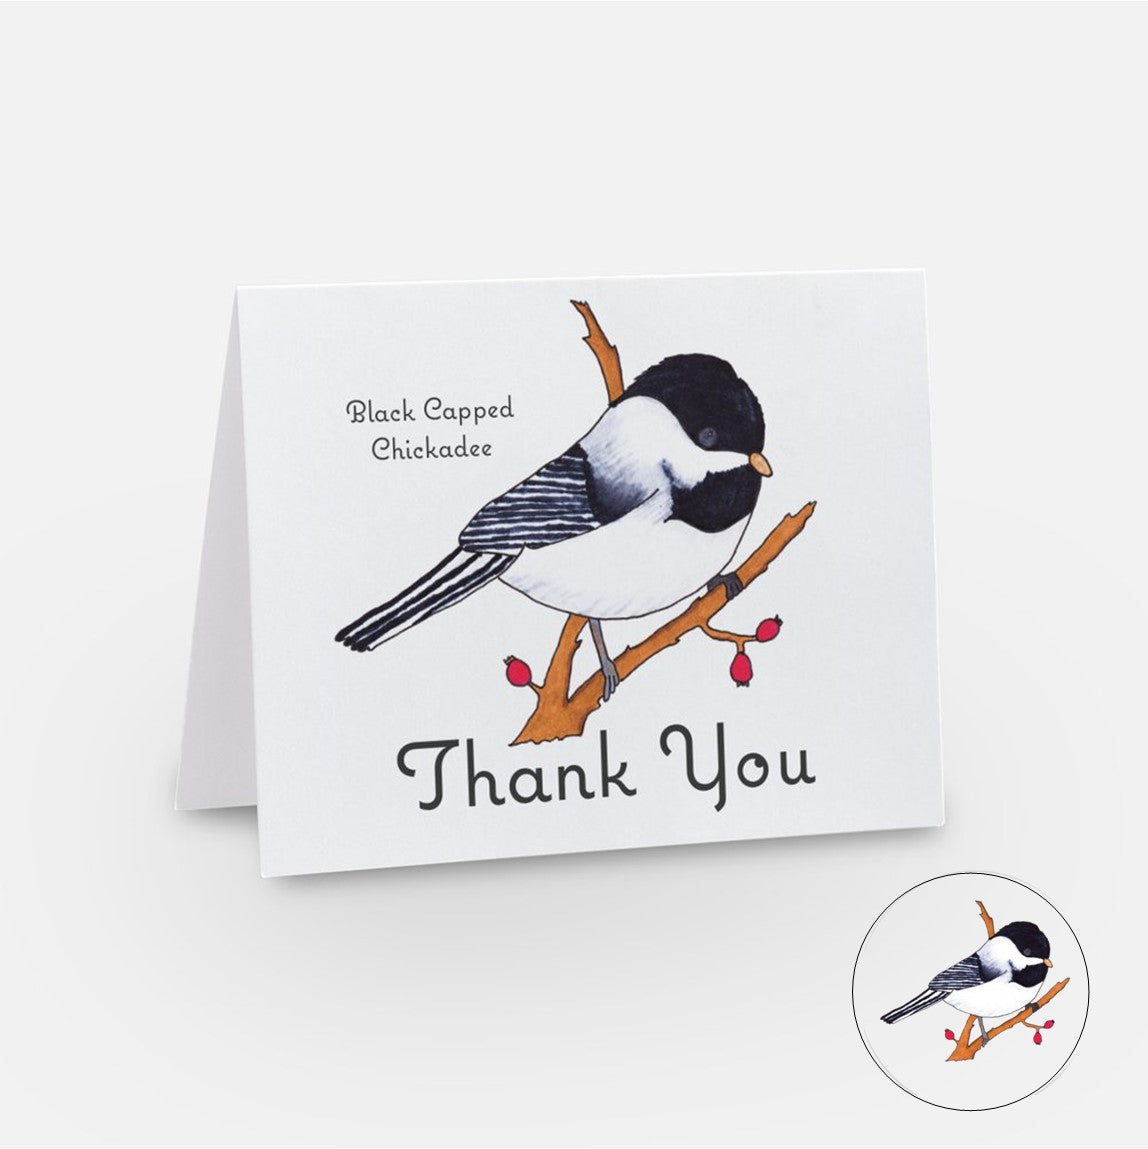 Cards - Thank You Card Bundle - Thank You Card for Gift - Thank You Cards to Show Appreciation of Thoughtfulness - Set of 3 Cards (Stationery & More) (Literacy Project) (Snail Mail)